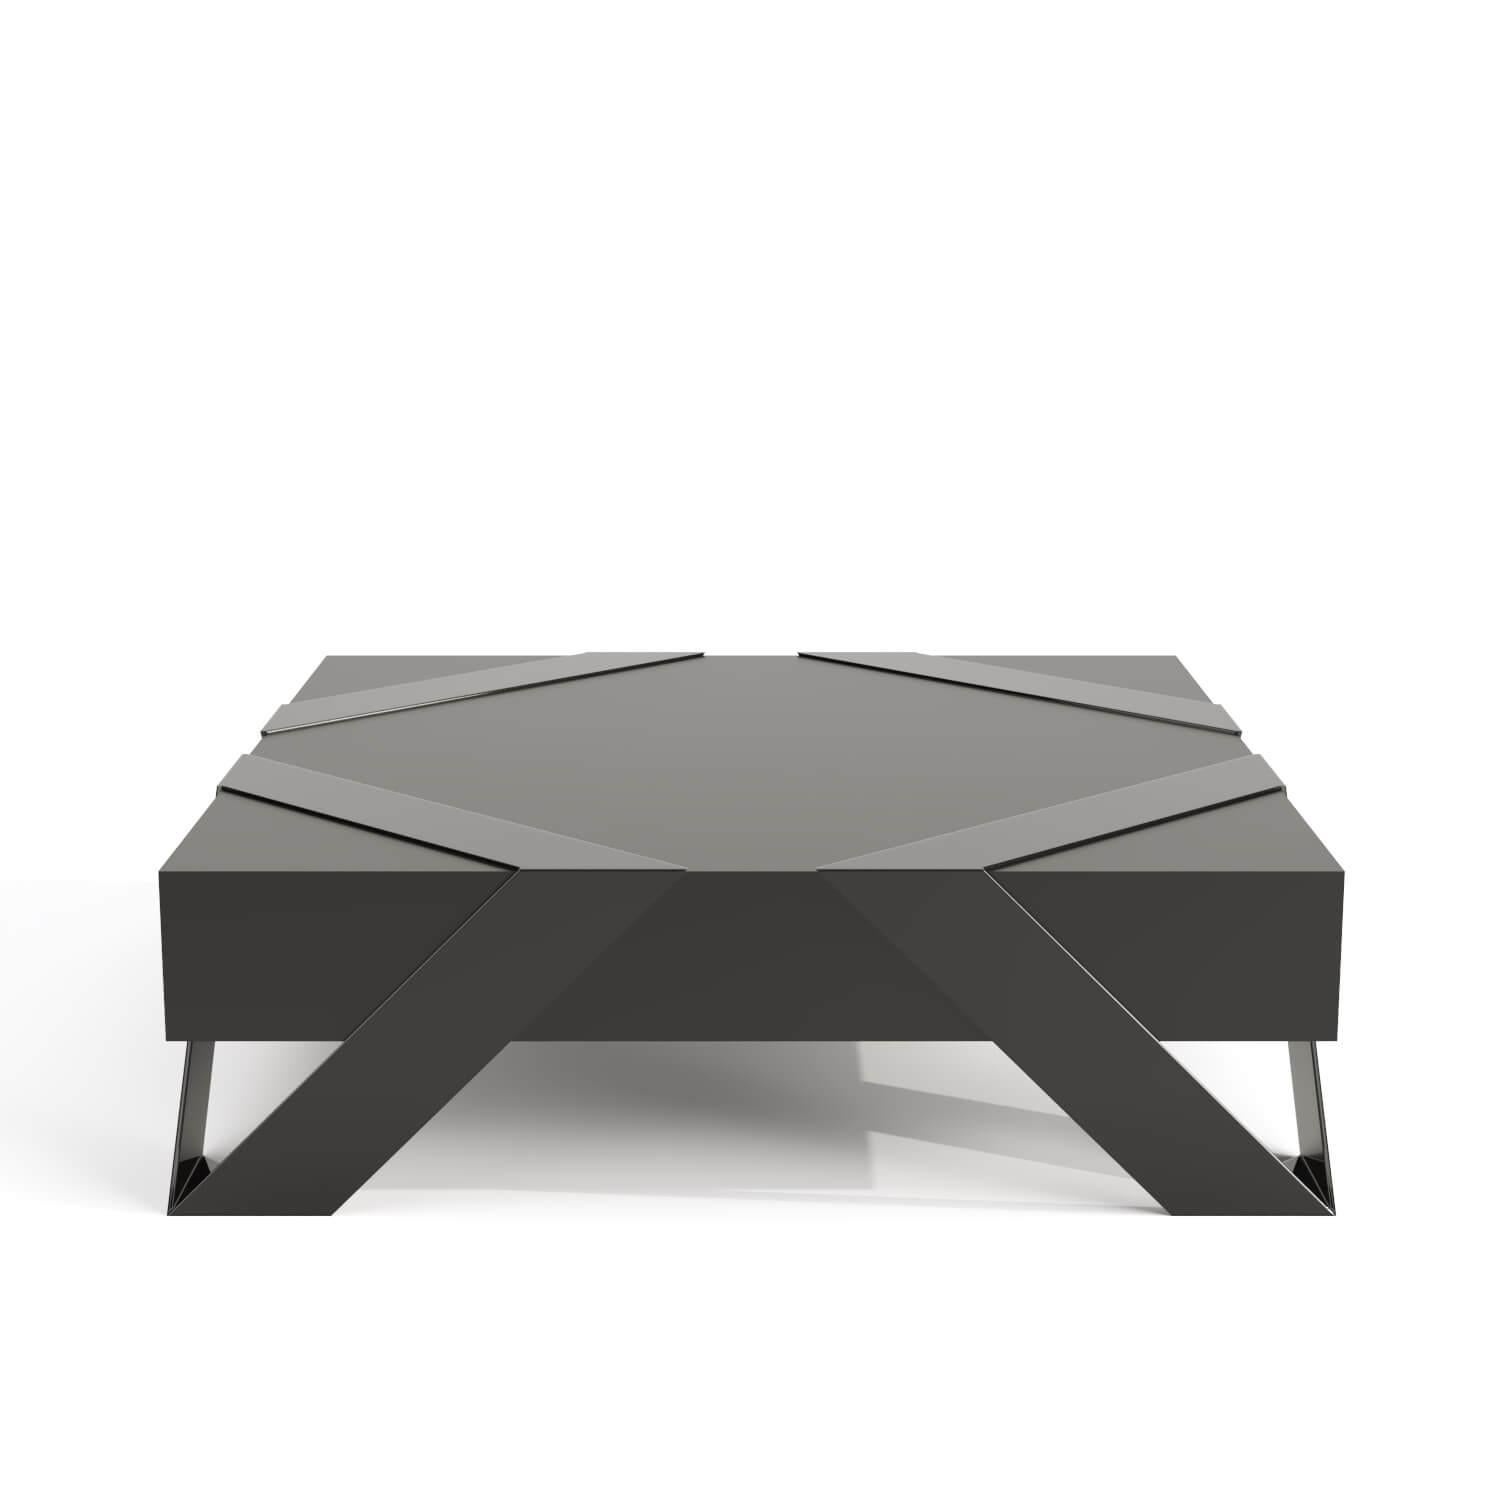 Cut Steel Modern Minimalist Square Coffee Table Black Lacquer Brushed Stainless Steel For Sale